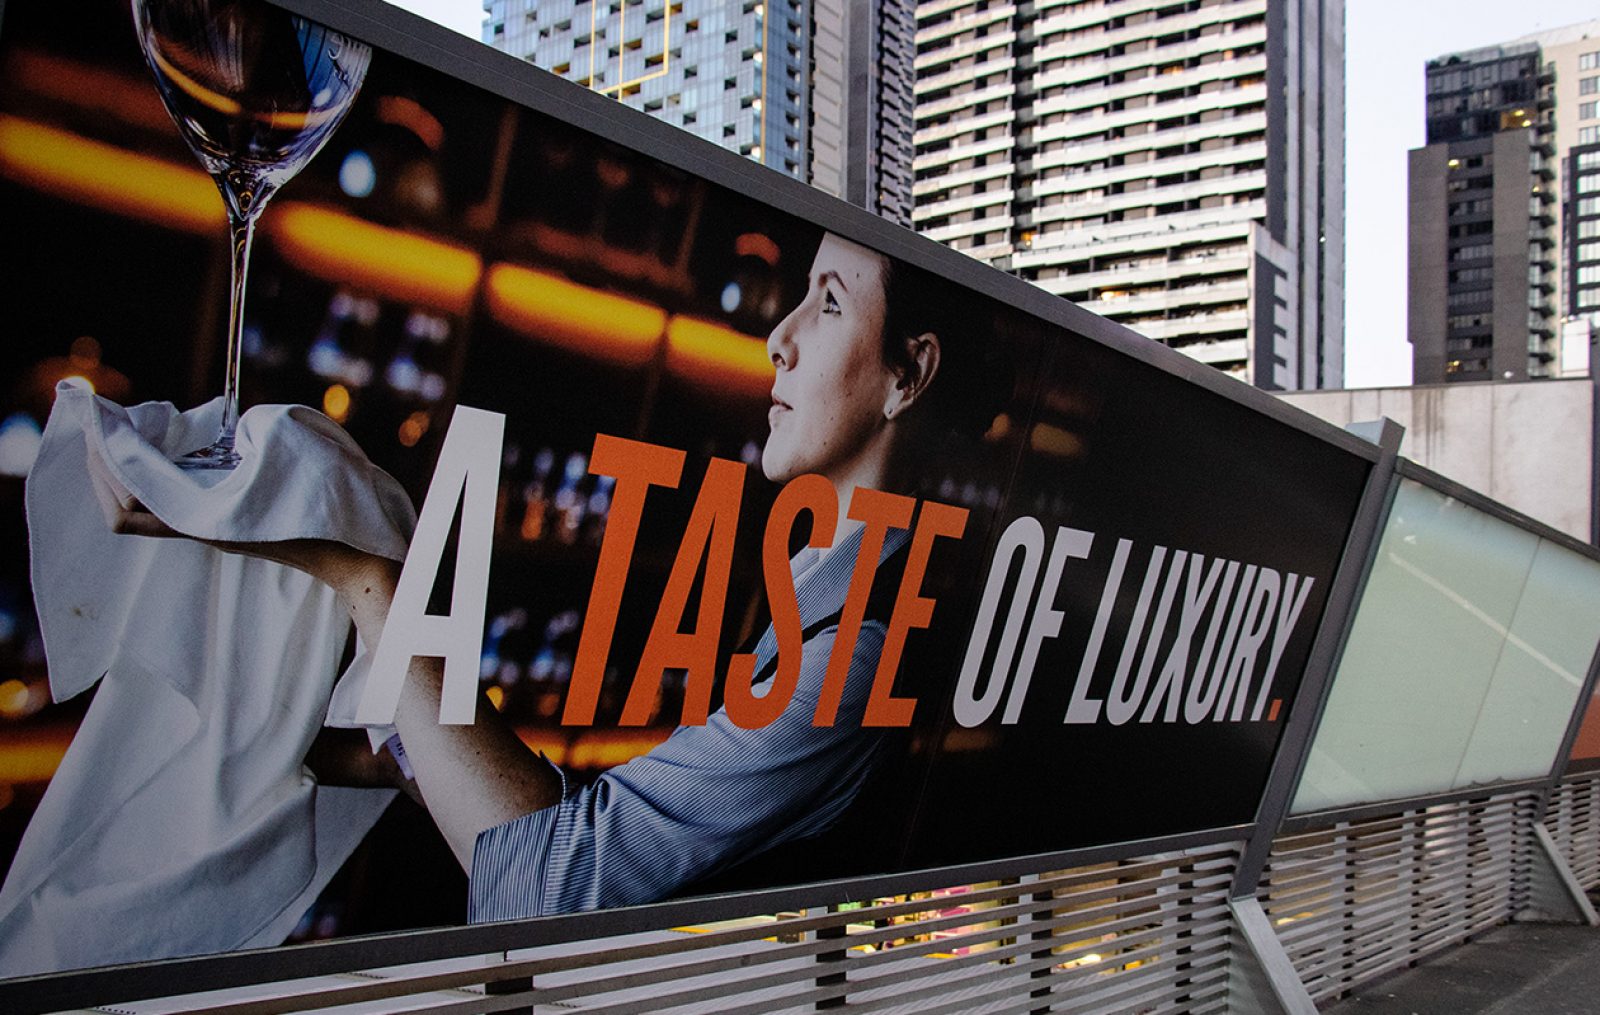 Billboard advertising at a train station with the tagline "A Taste of Luxury"